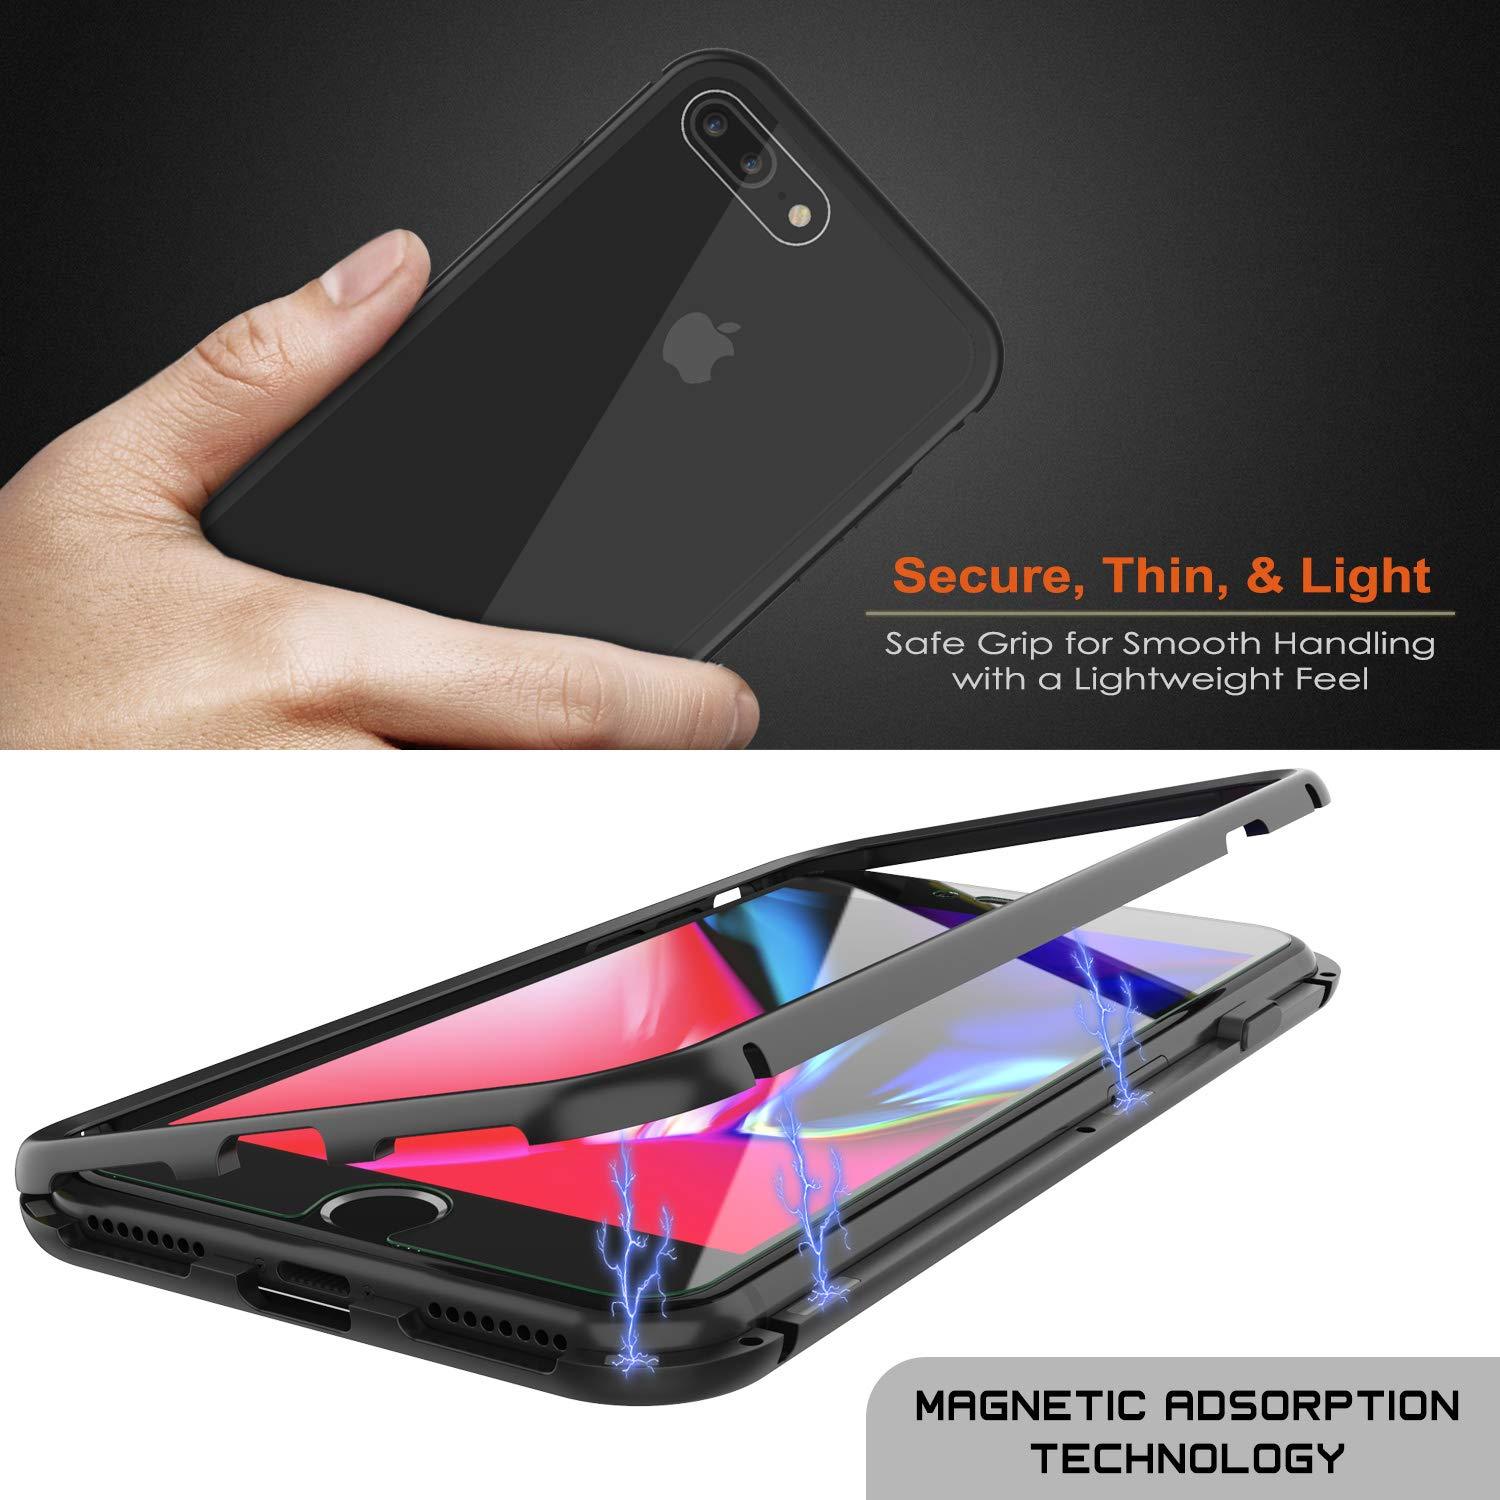 iPhone 7+ Plus Case, Punkcase Magnetix 2.0 Protective TPU Cover W/ Tempered Glass Screen Protector [Black]